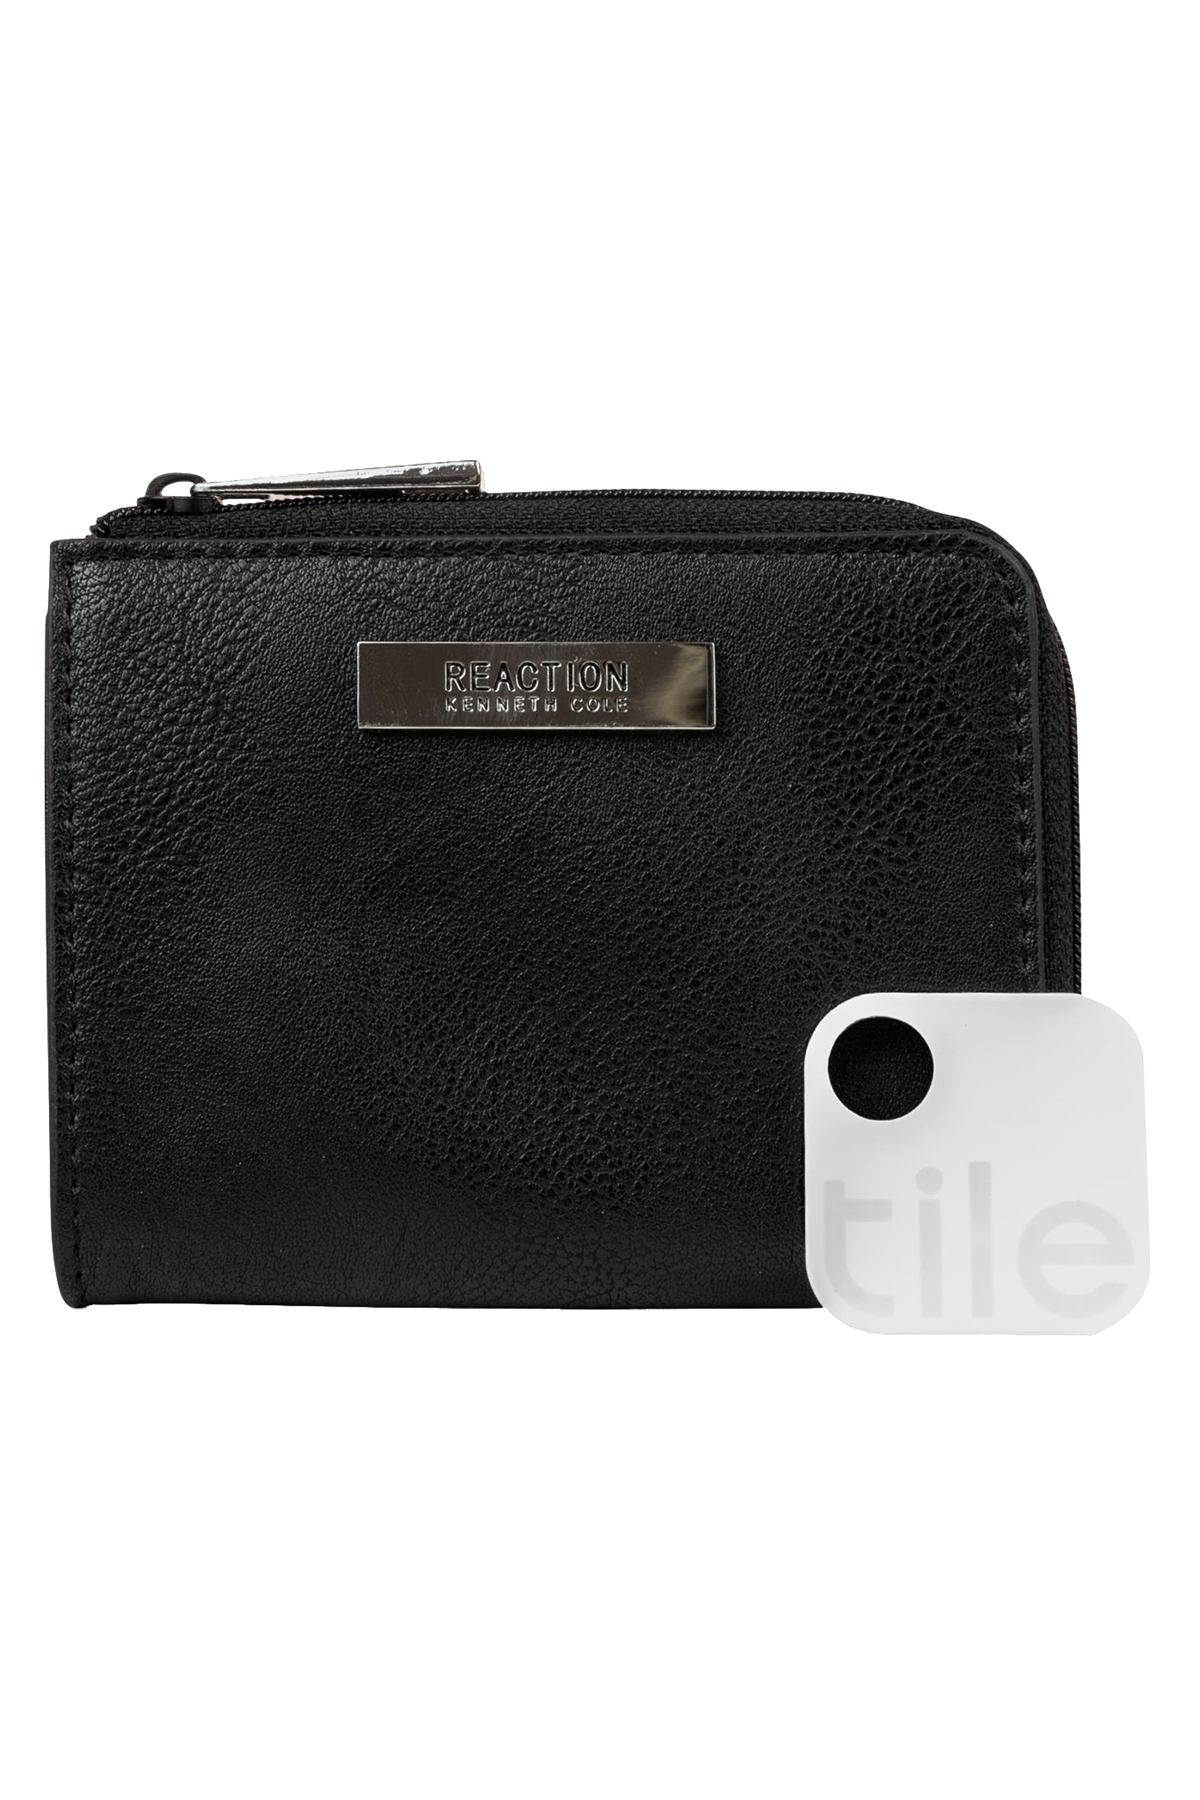 Kenneth Cole Reaction Black Top-Zip Coin Purse With Tracker